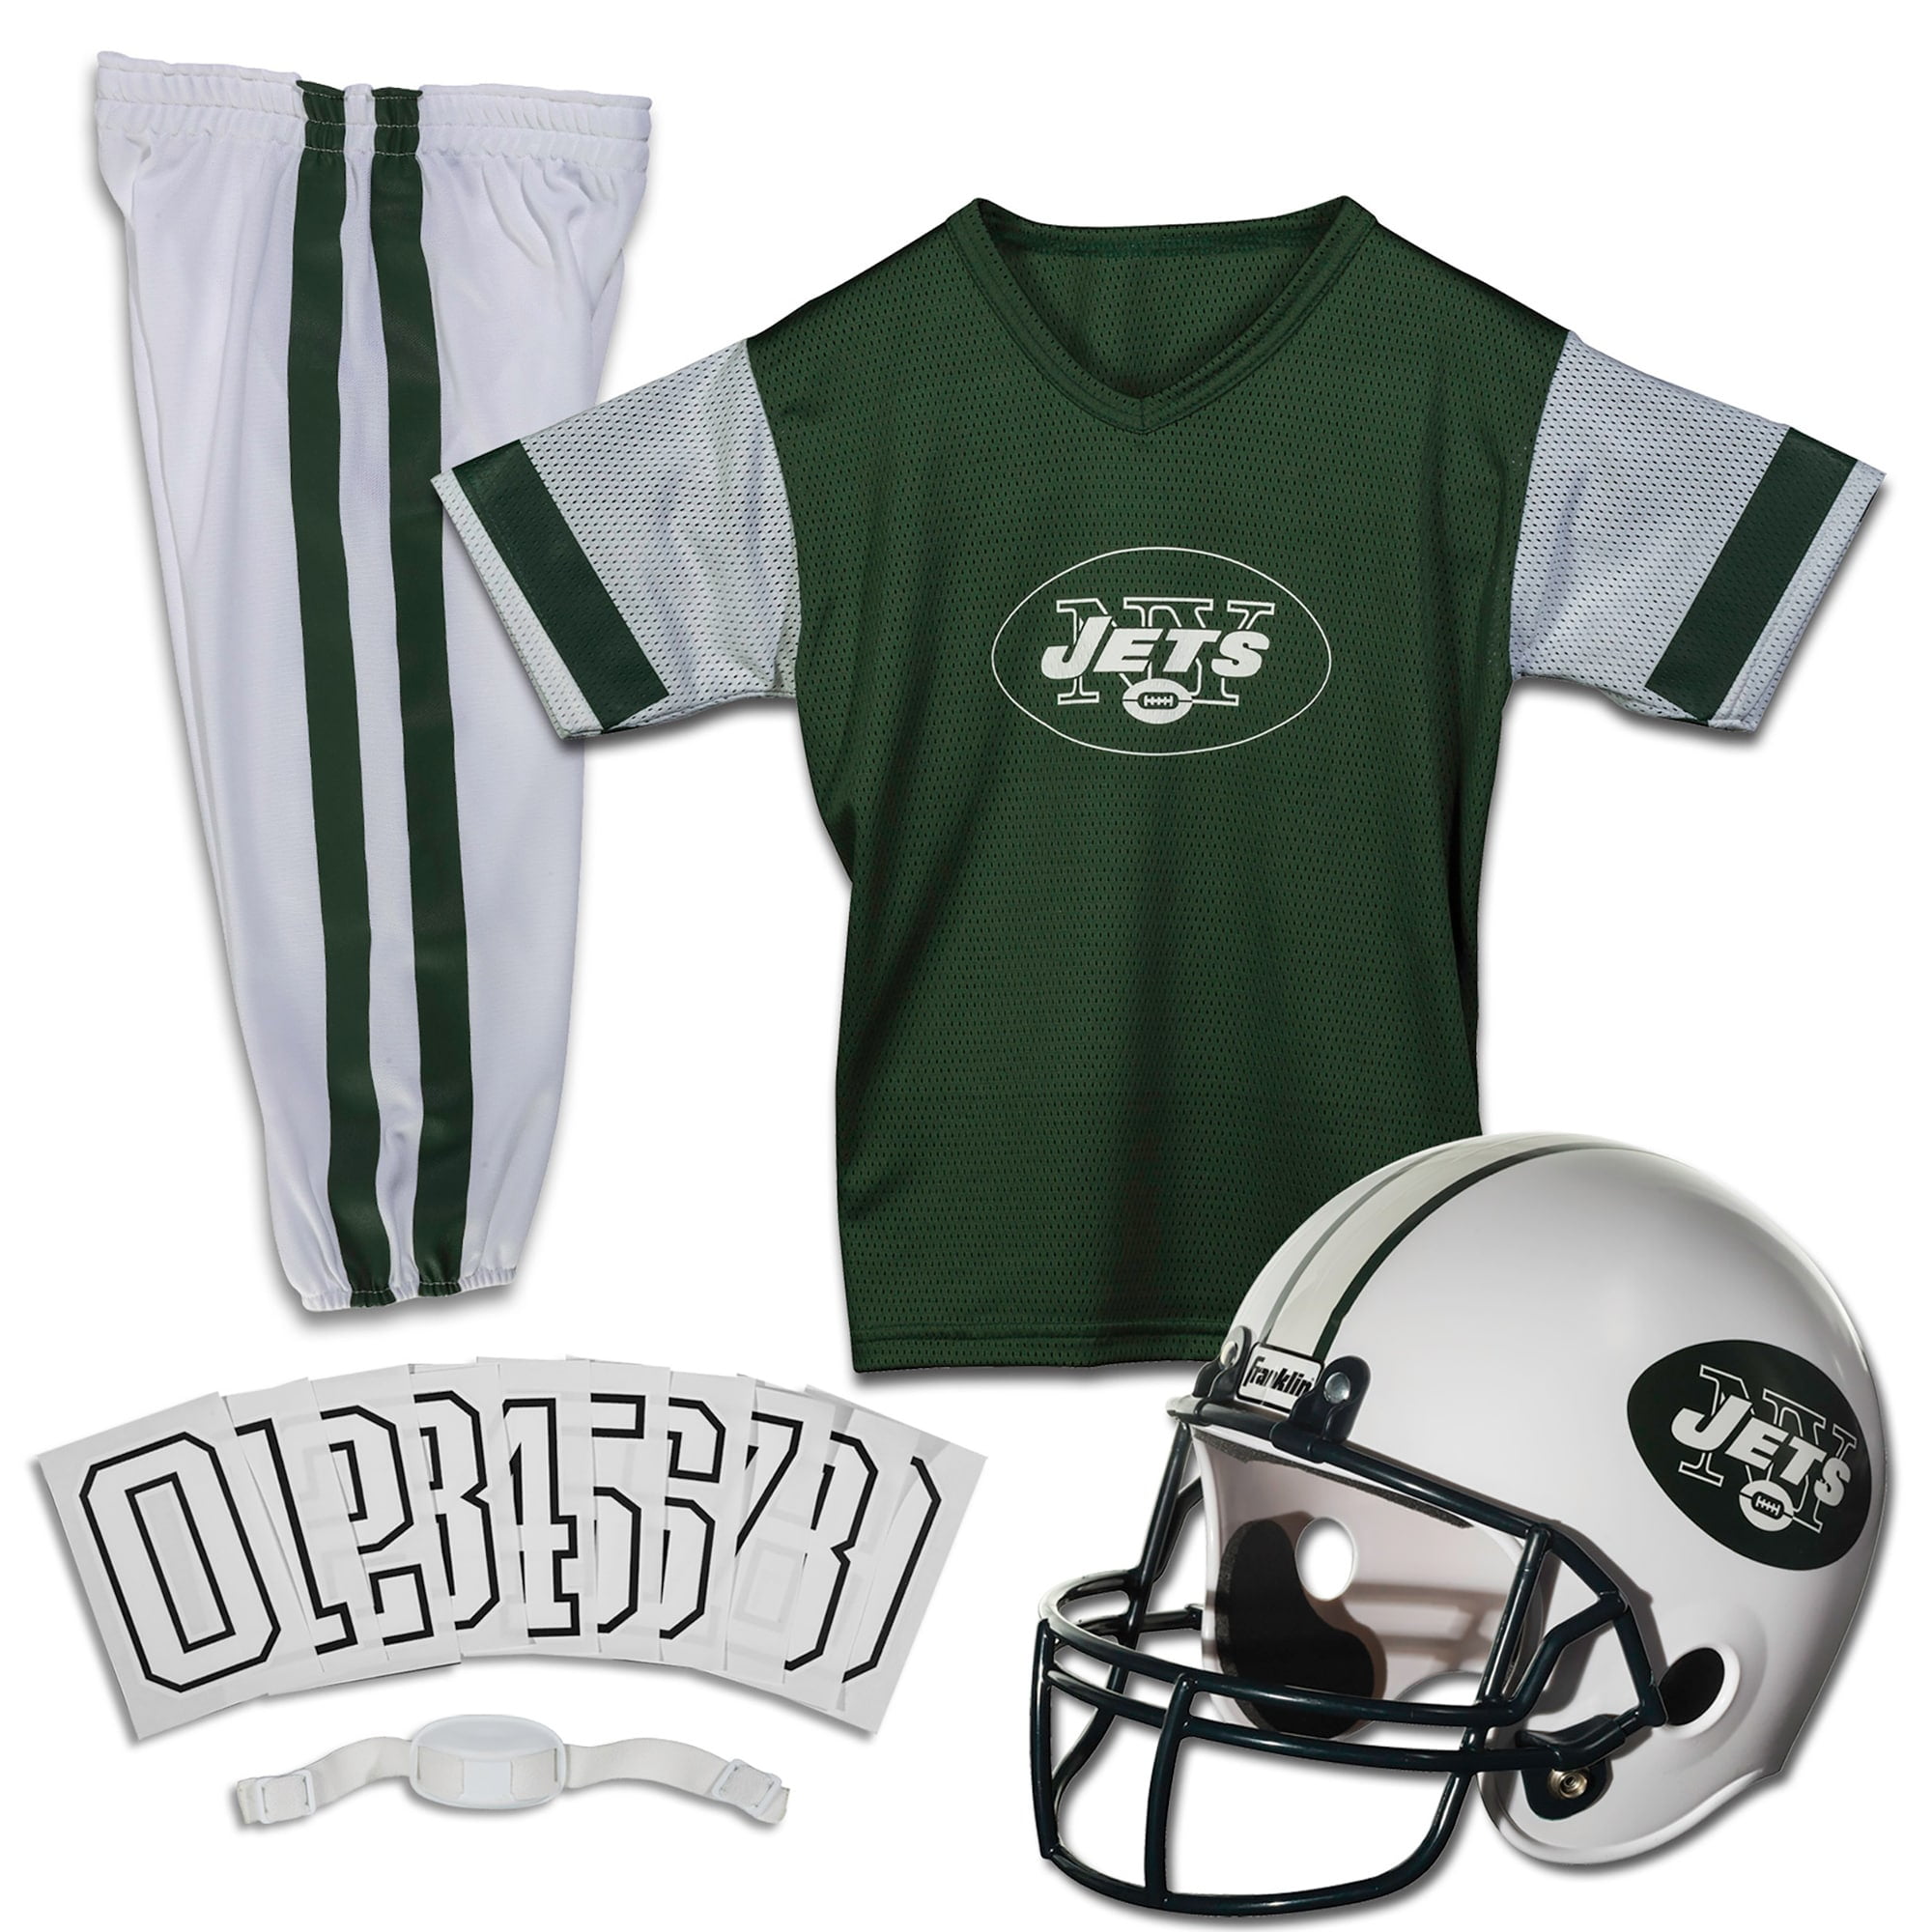 new york jets youth jersey